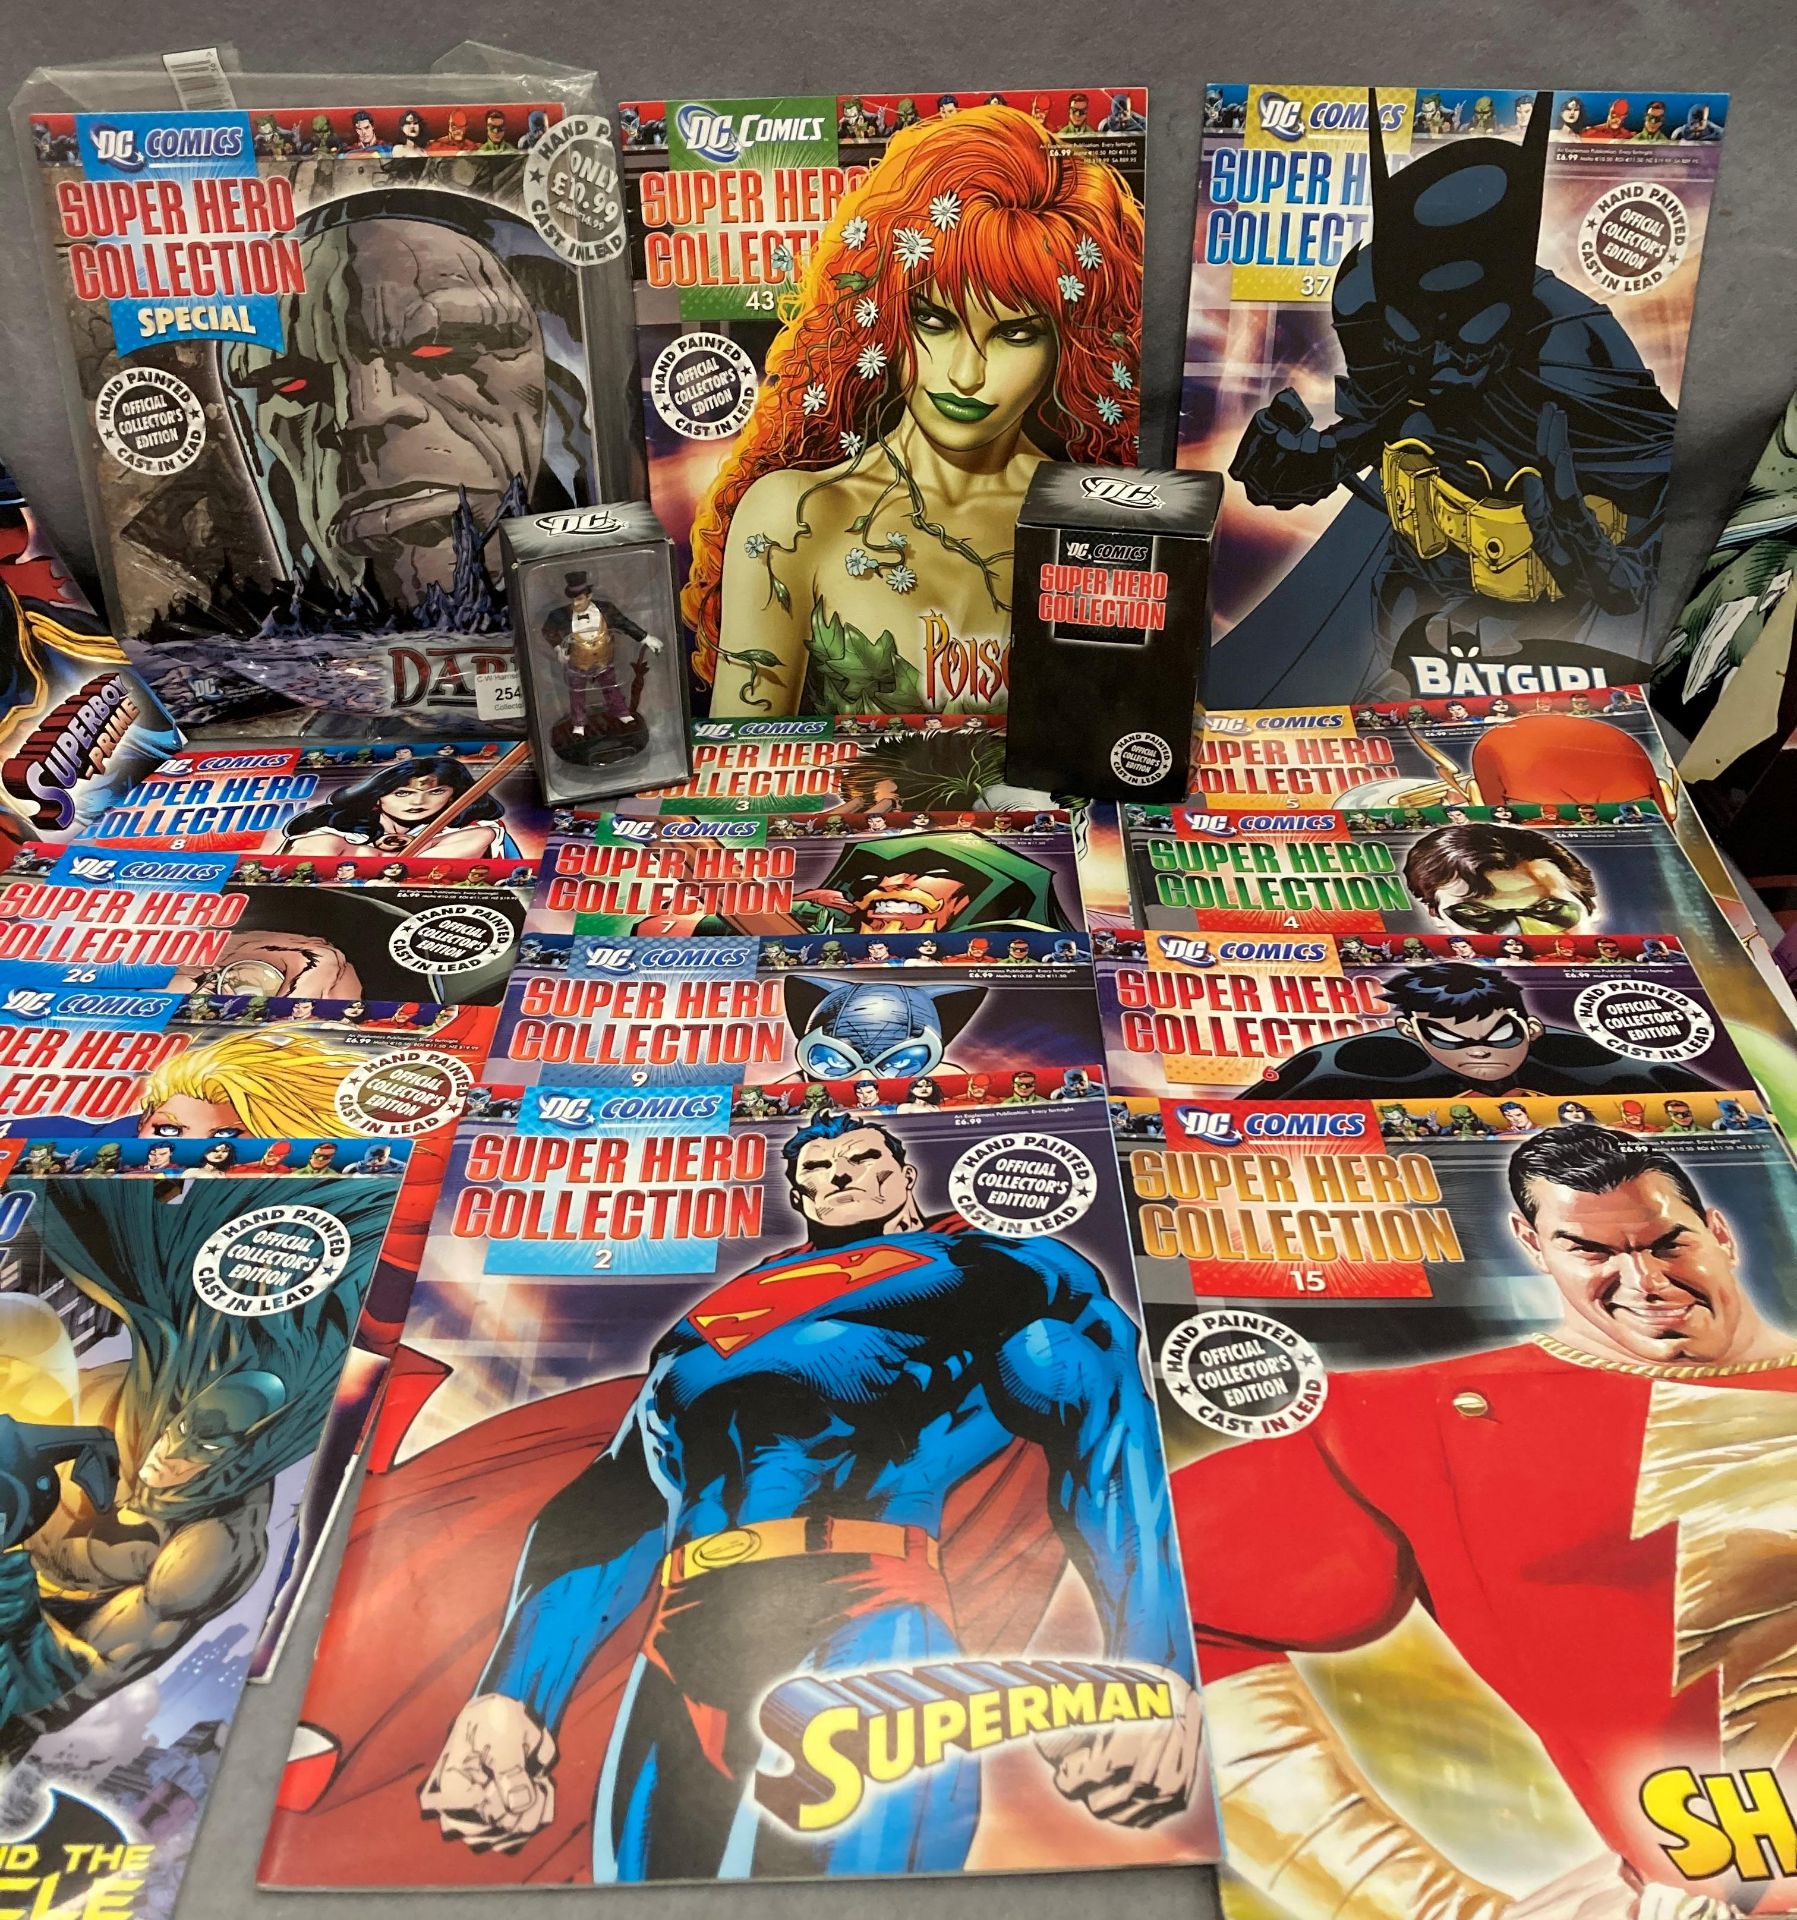 25 DC Comics Super Hero Collection comics and two boxed DC Comics Super Hero Collection models - - Image 2 of 4